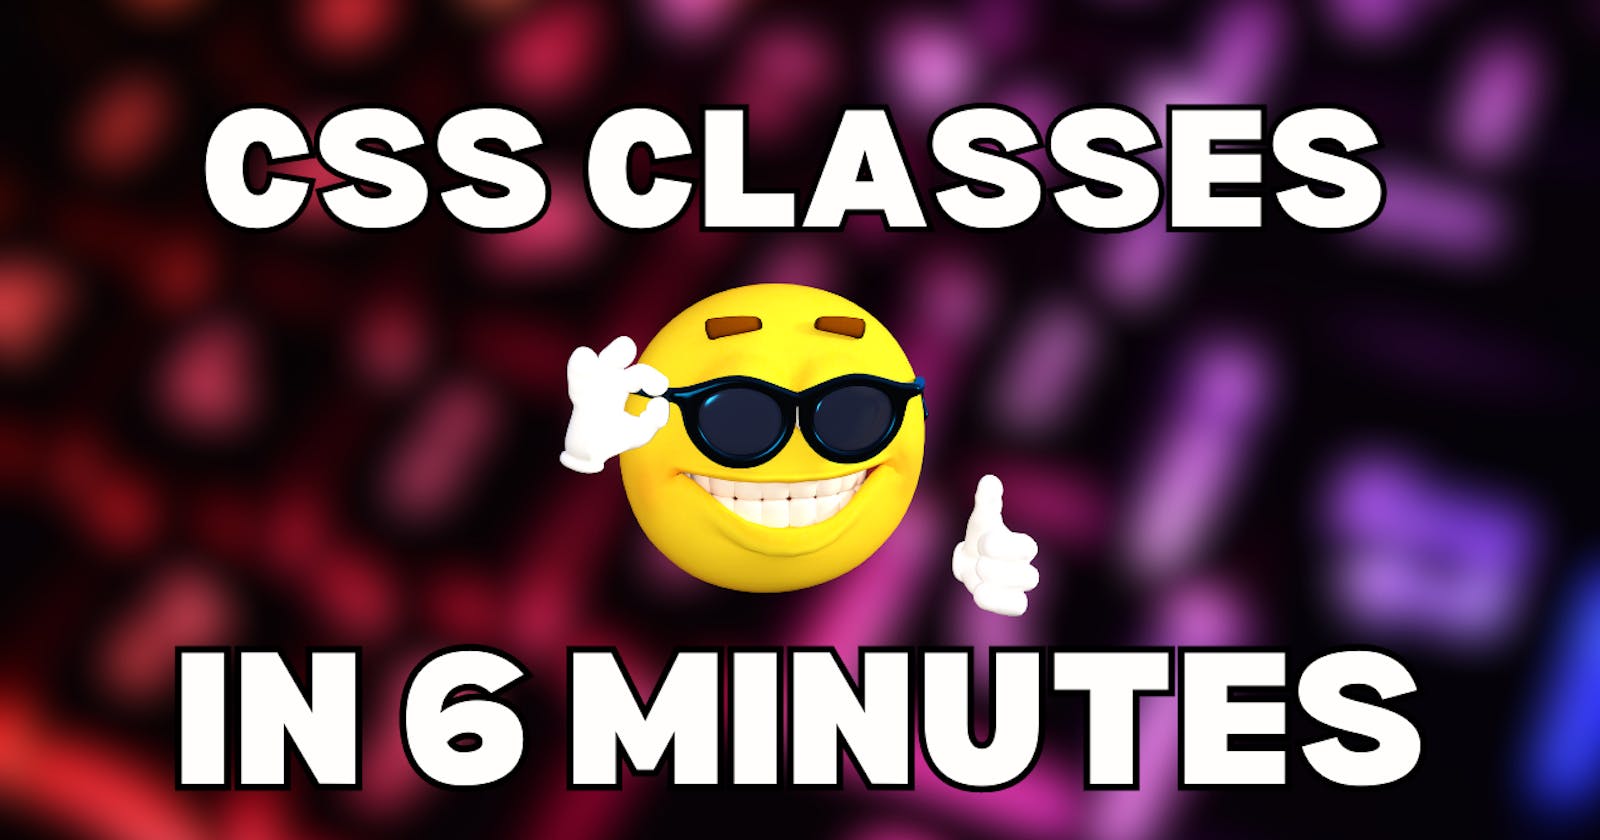 CSS Classes Fully explained in an easy way!